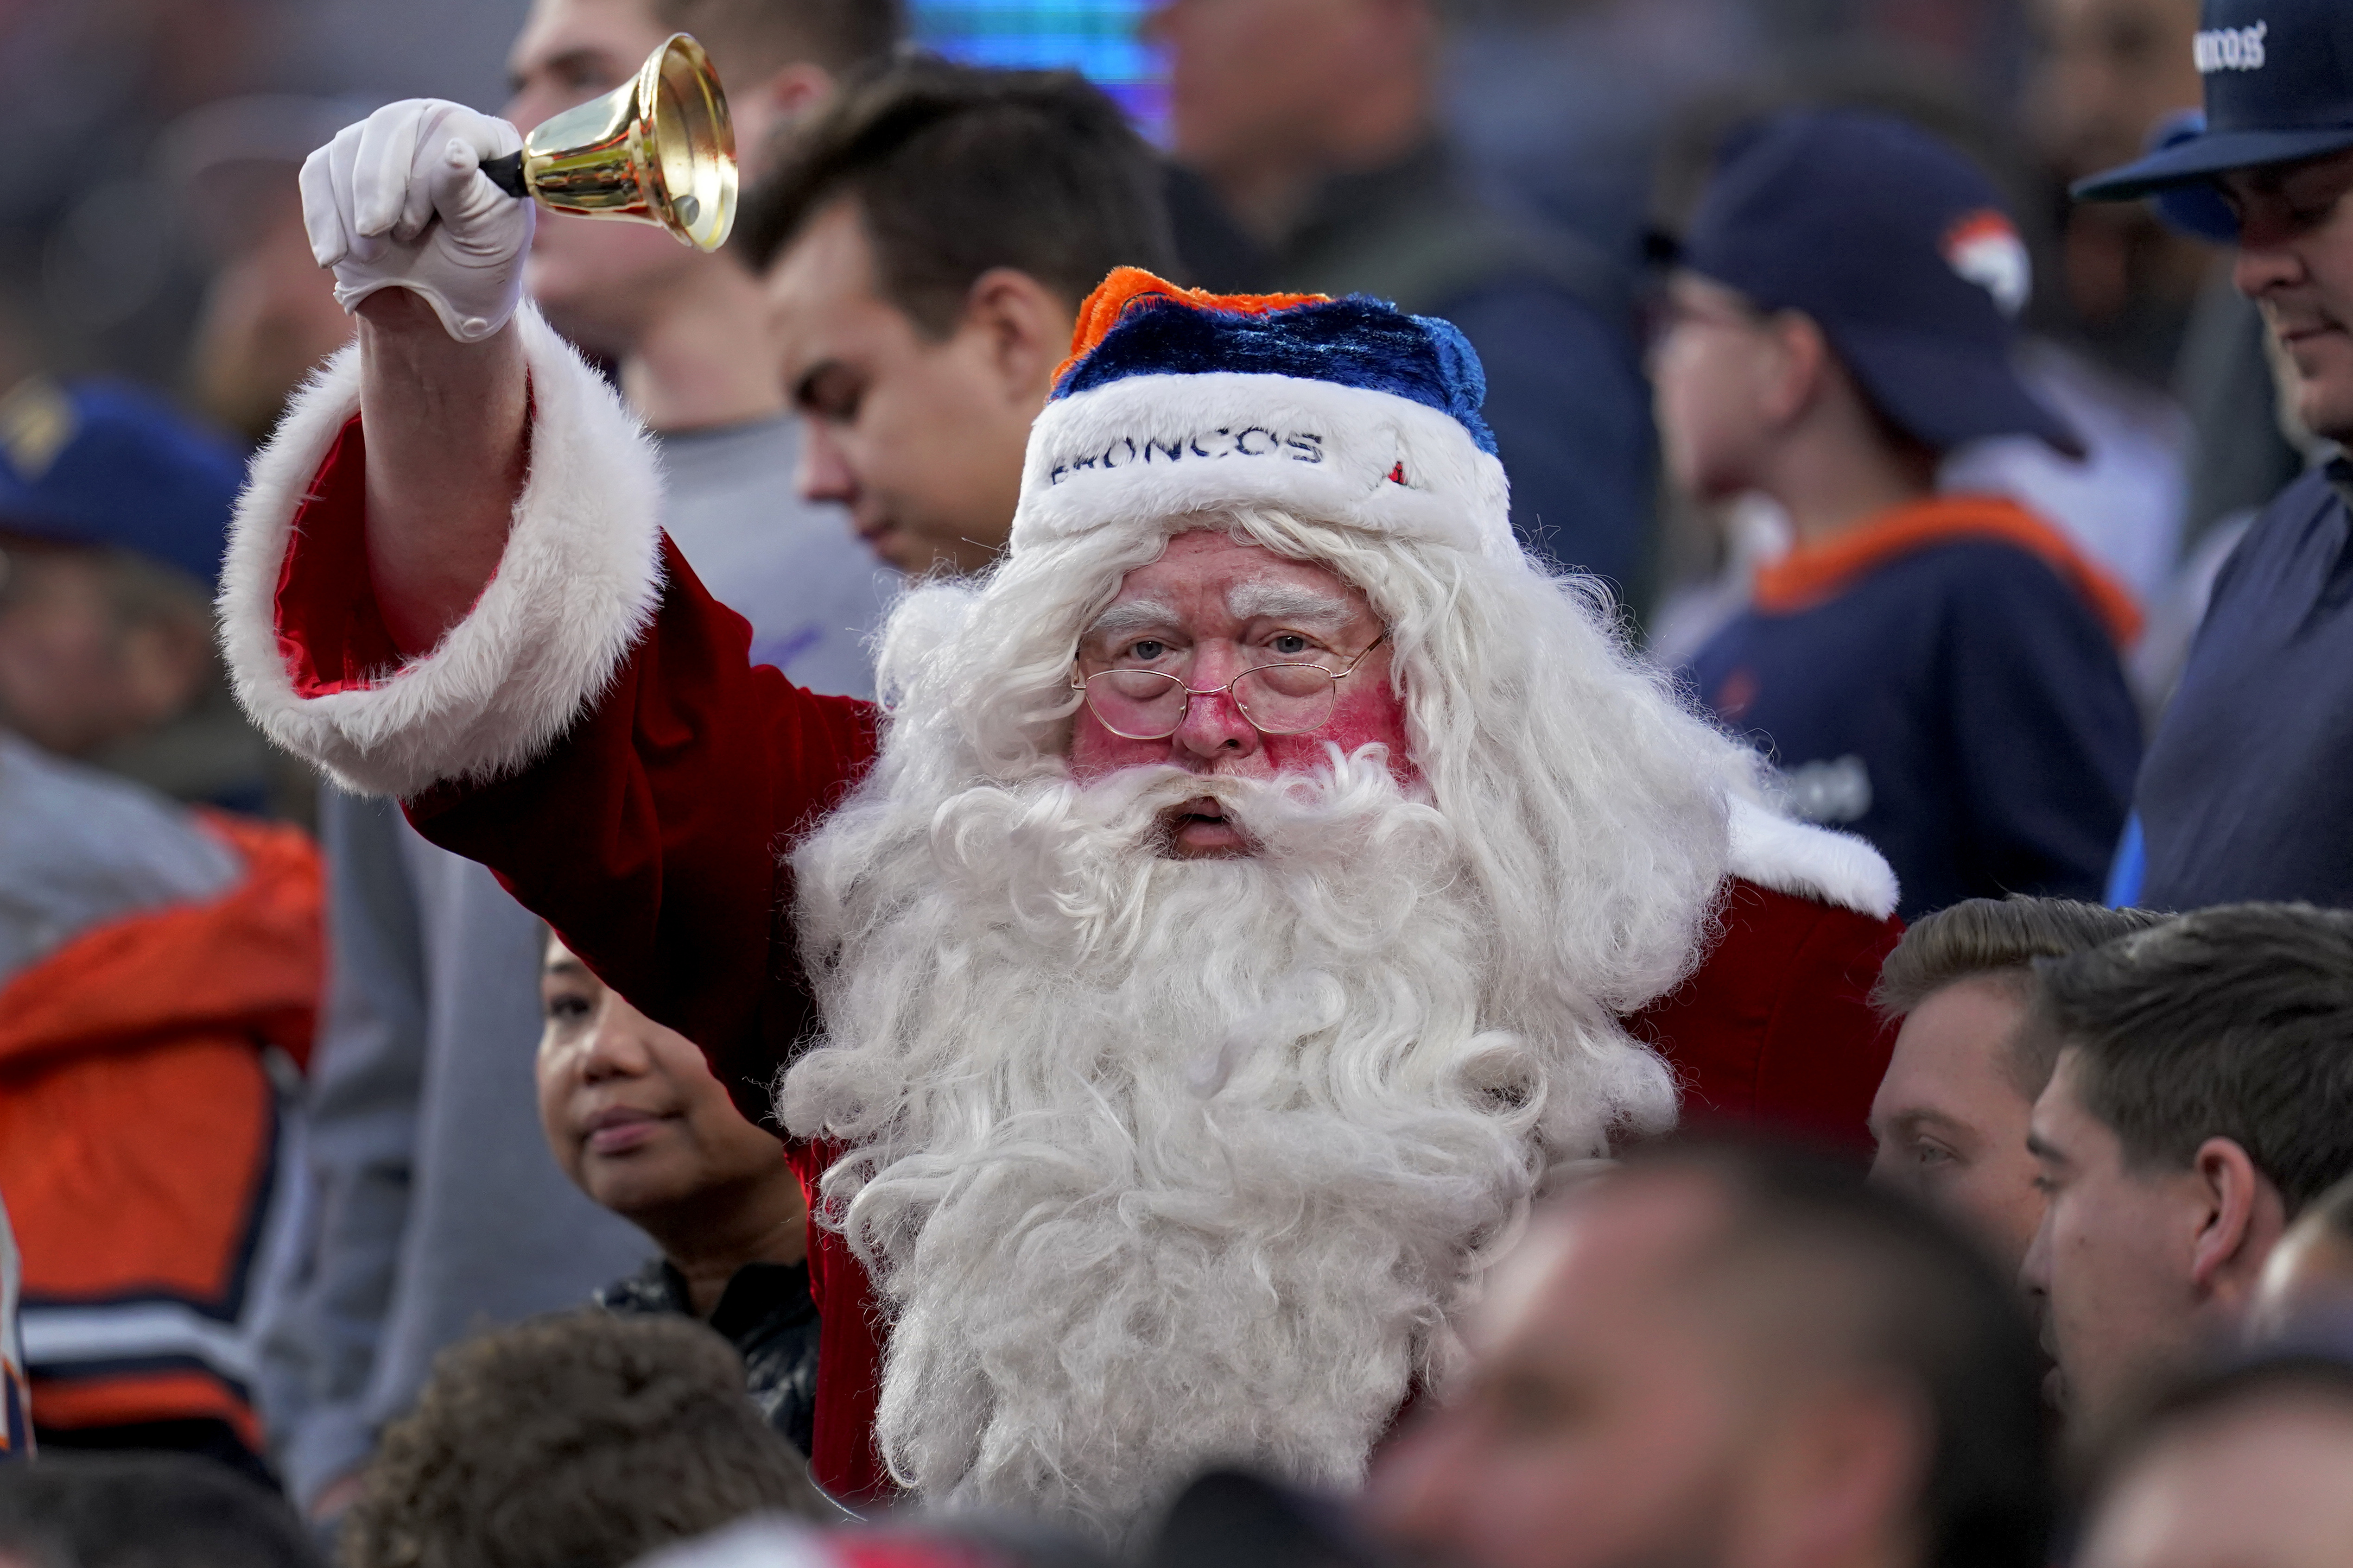 NFL Week 16 Best Bets For Christmas: Santa Brady shows out